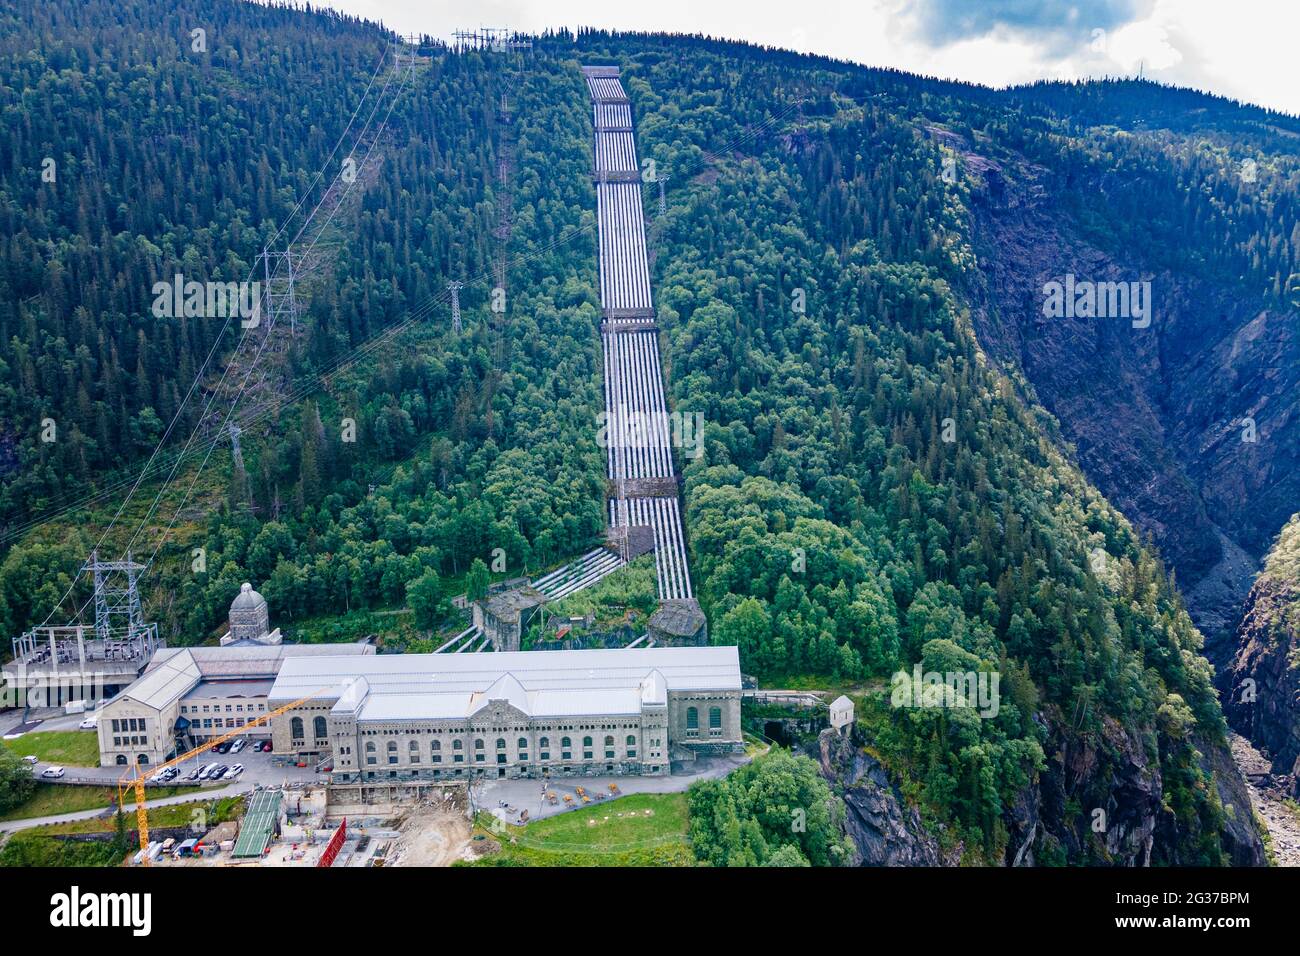 Aerial of the Hydroelectric power station, Unesco world heritage Industrial site Rjukan-Notodden, Norway Stock Photo